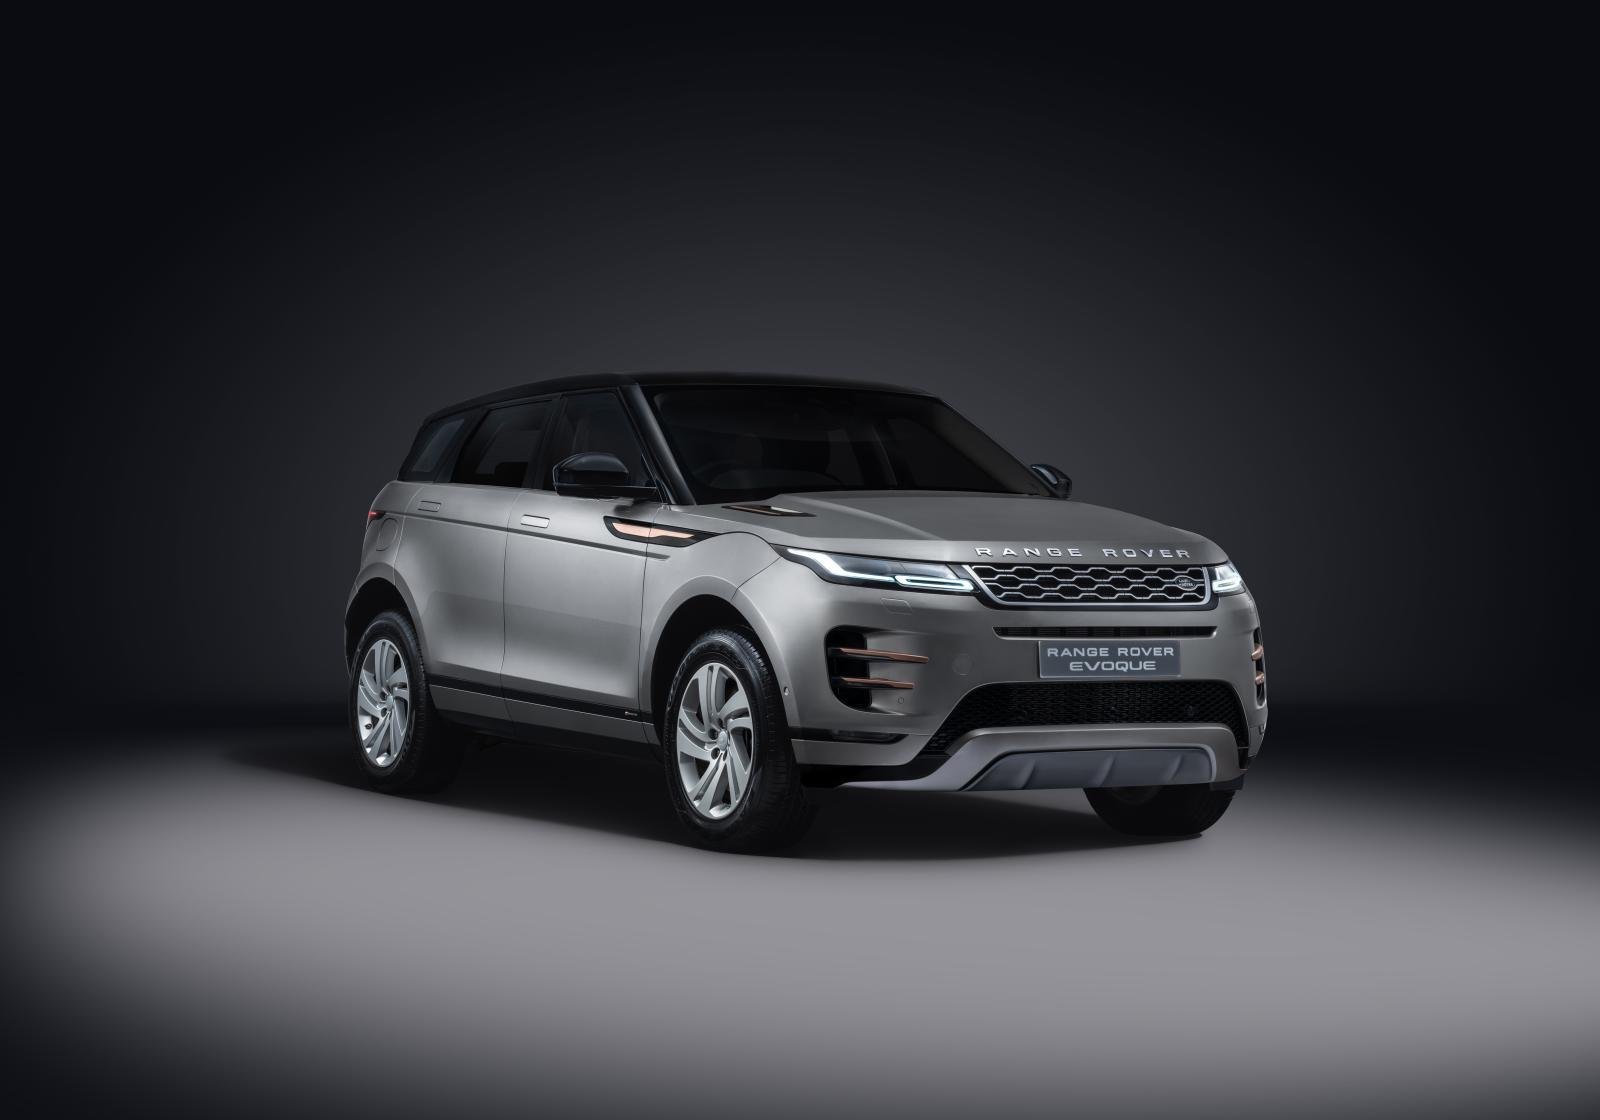 2021 Range Rover Evoque Launched, Prices Start at Rs 64.12 Lakh